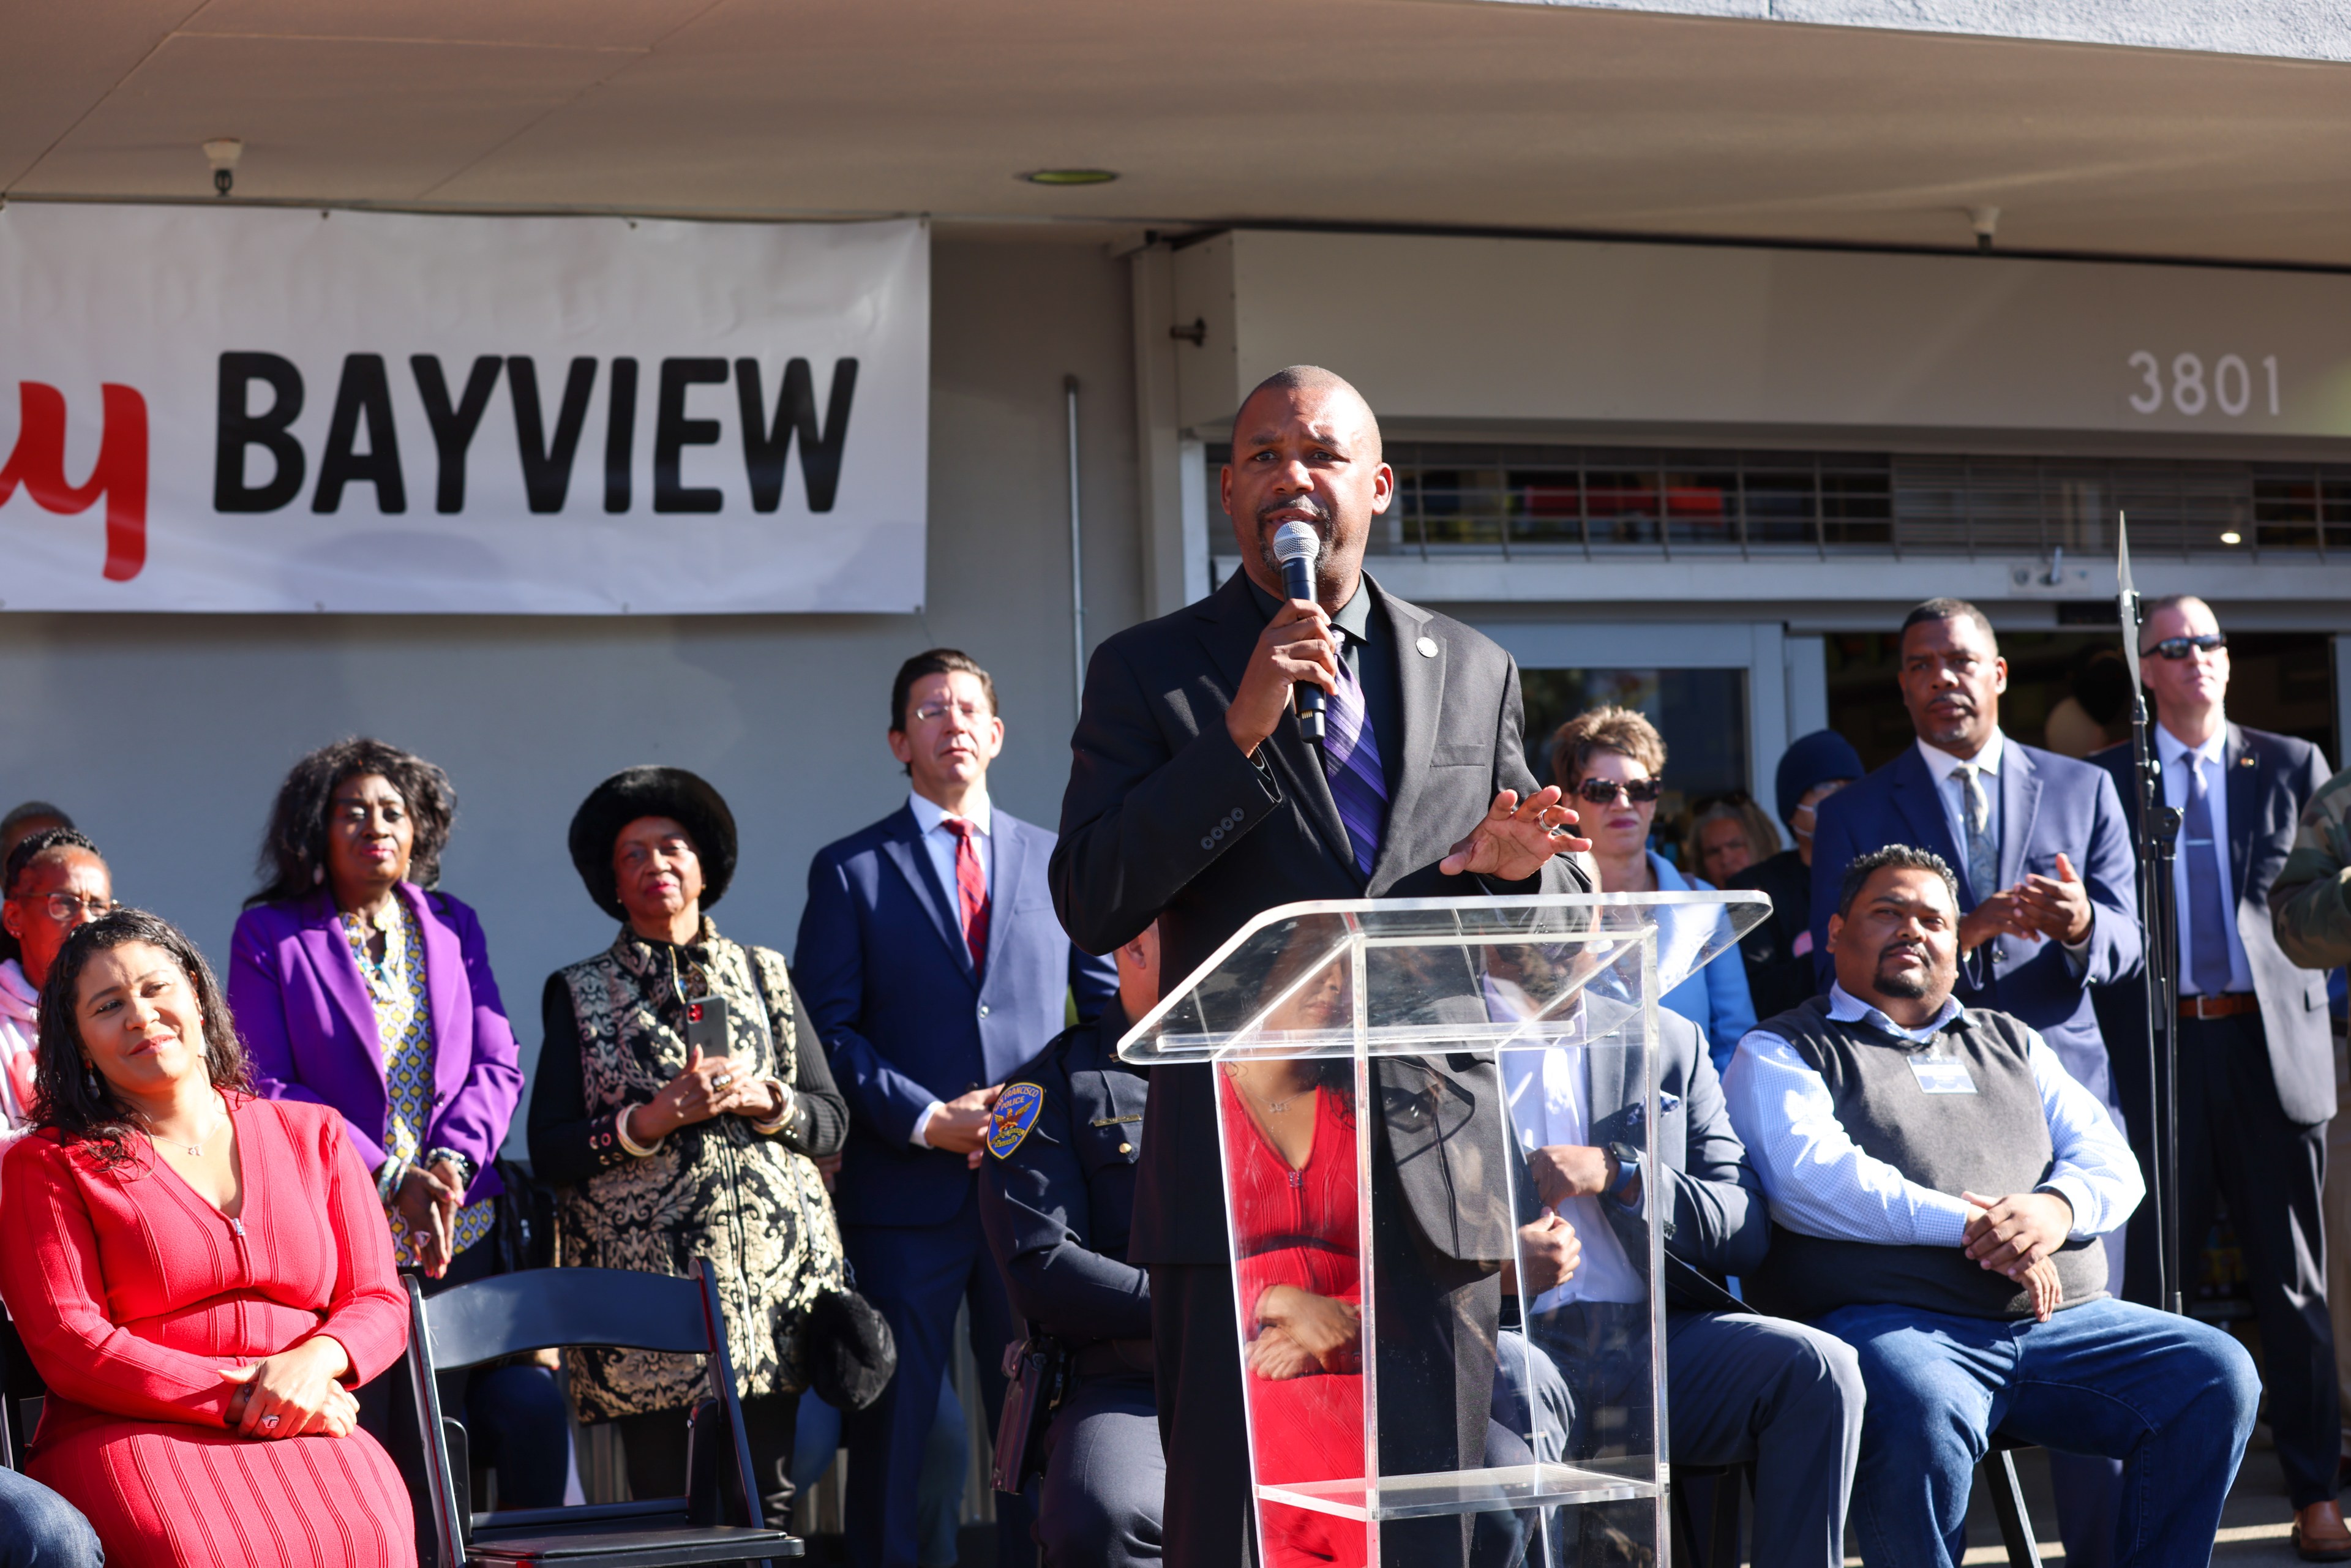 Supervisor Shamann Walton speaks at the opening of the new Lucky Bayview in front of a large crowd including Mayor London Breed.